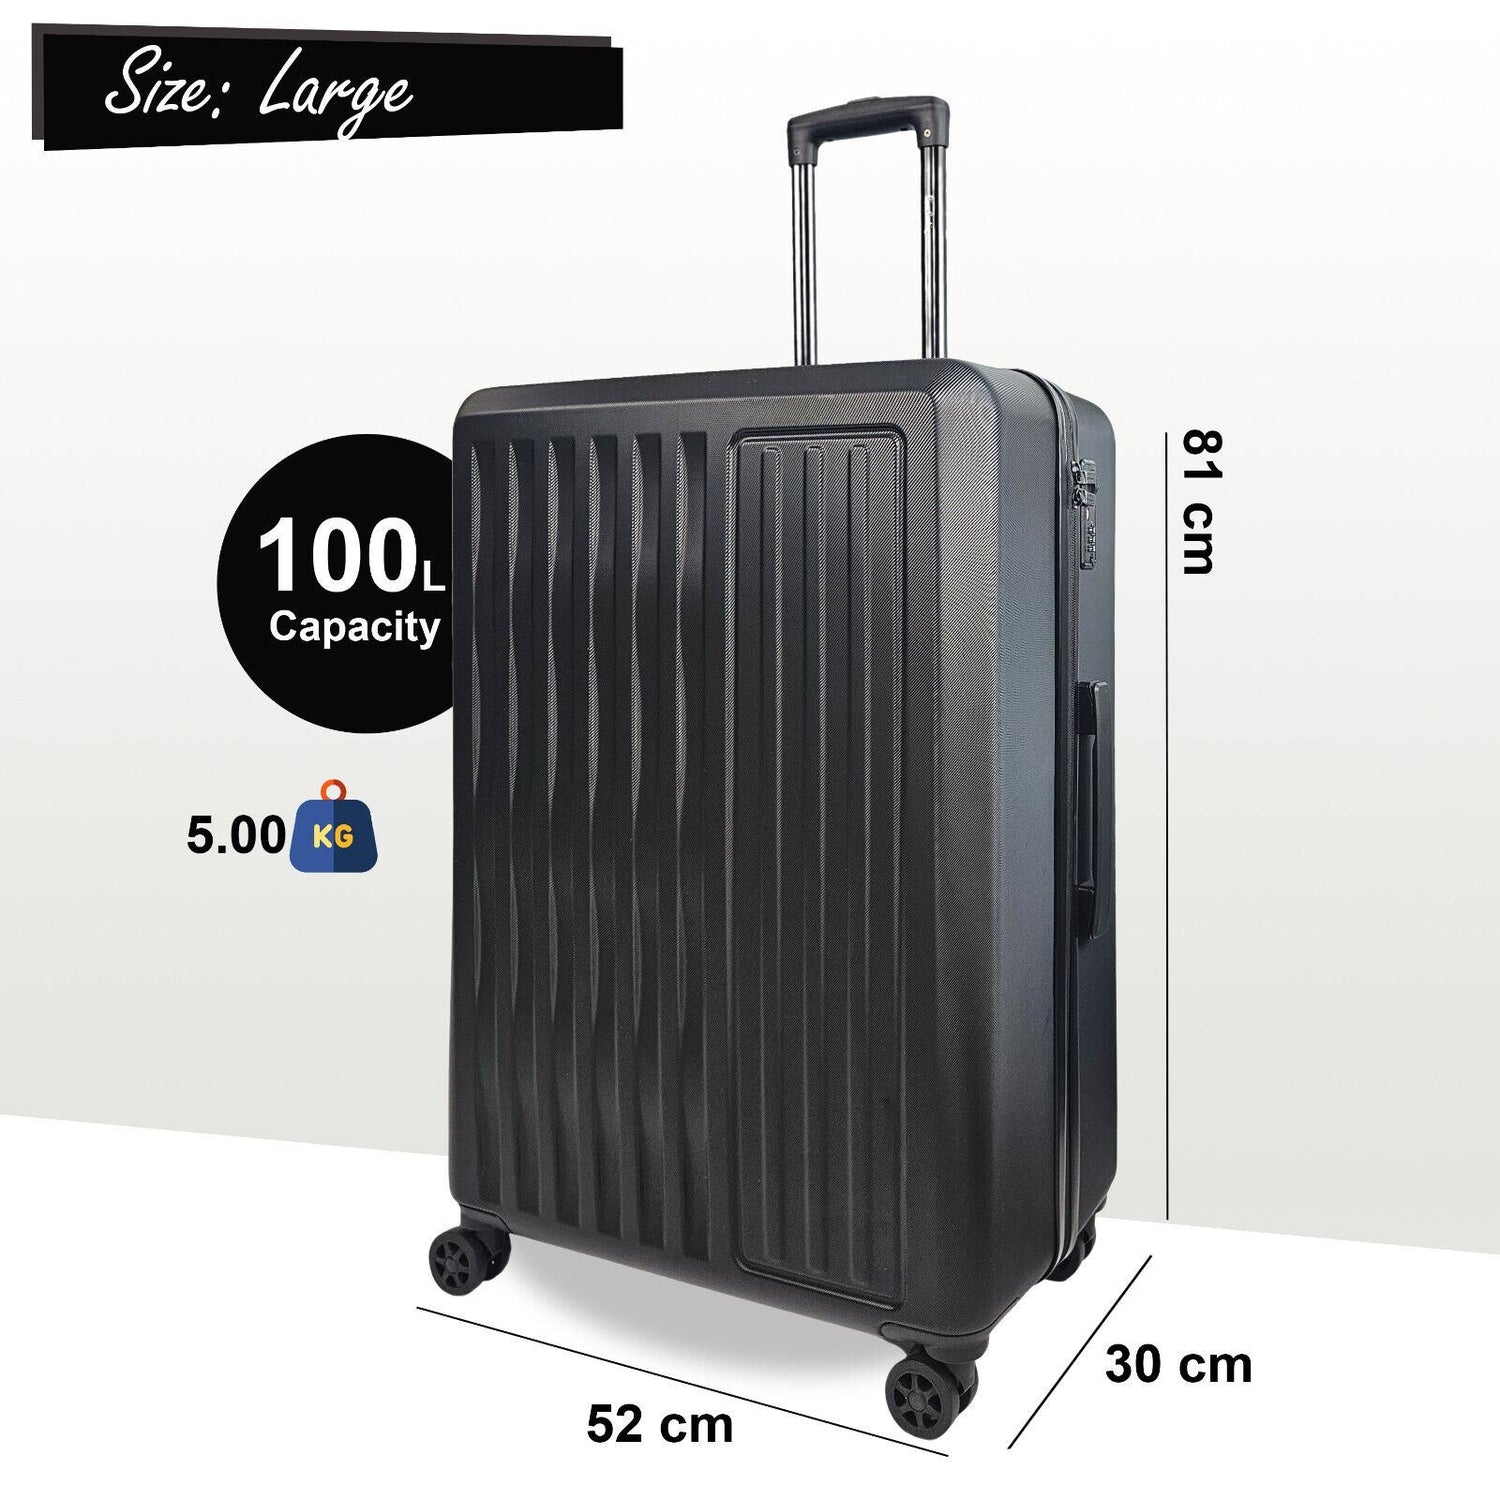 Cullman Large Hard Shell Suitcase in Black